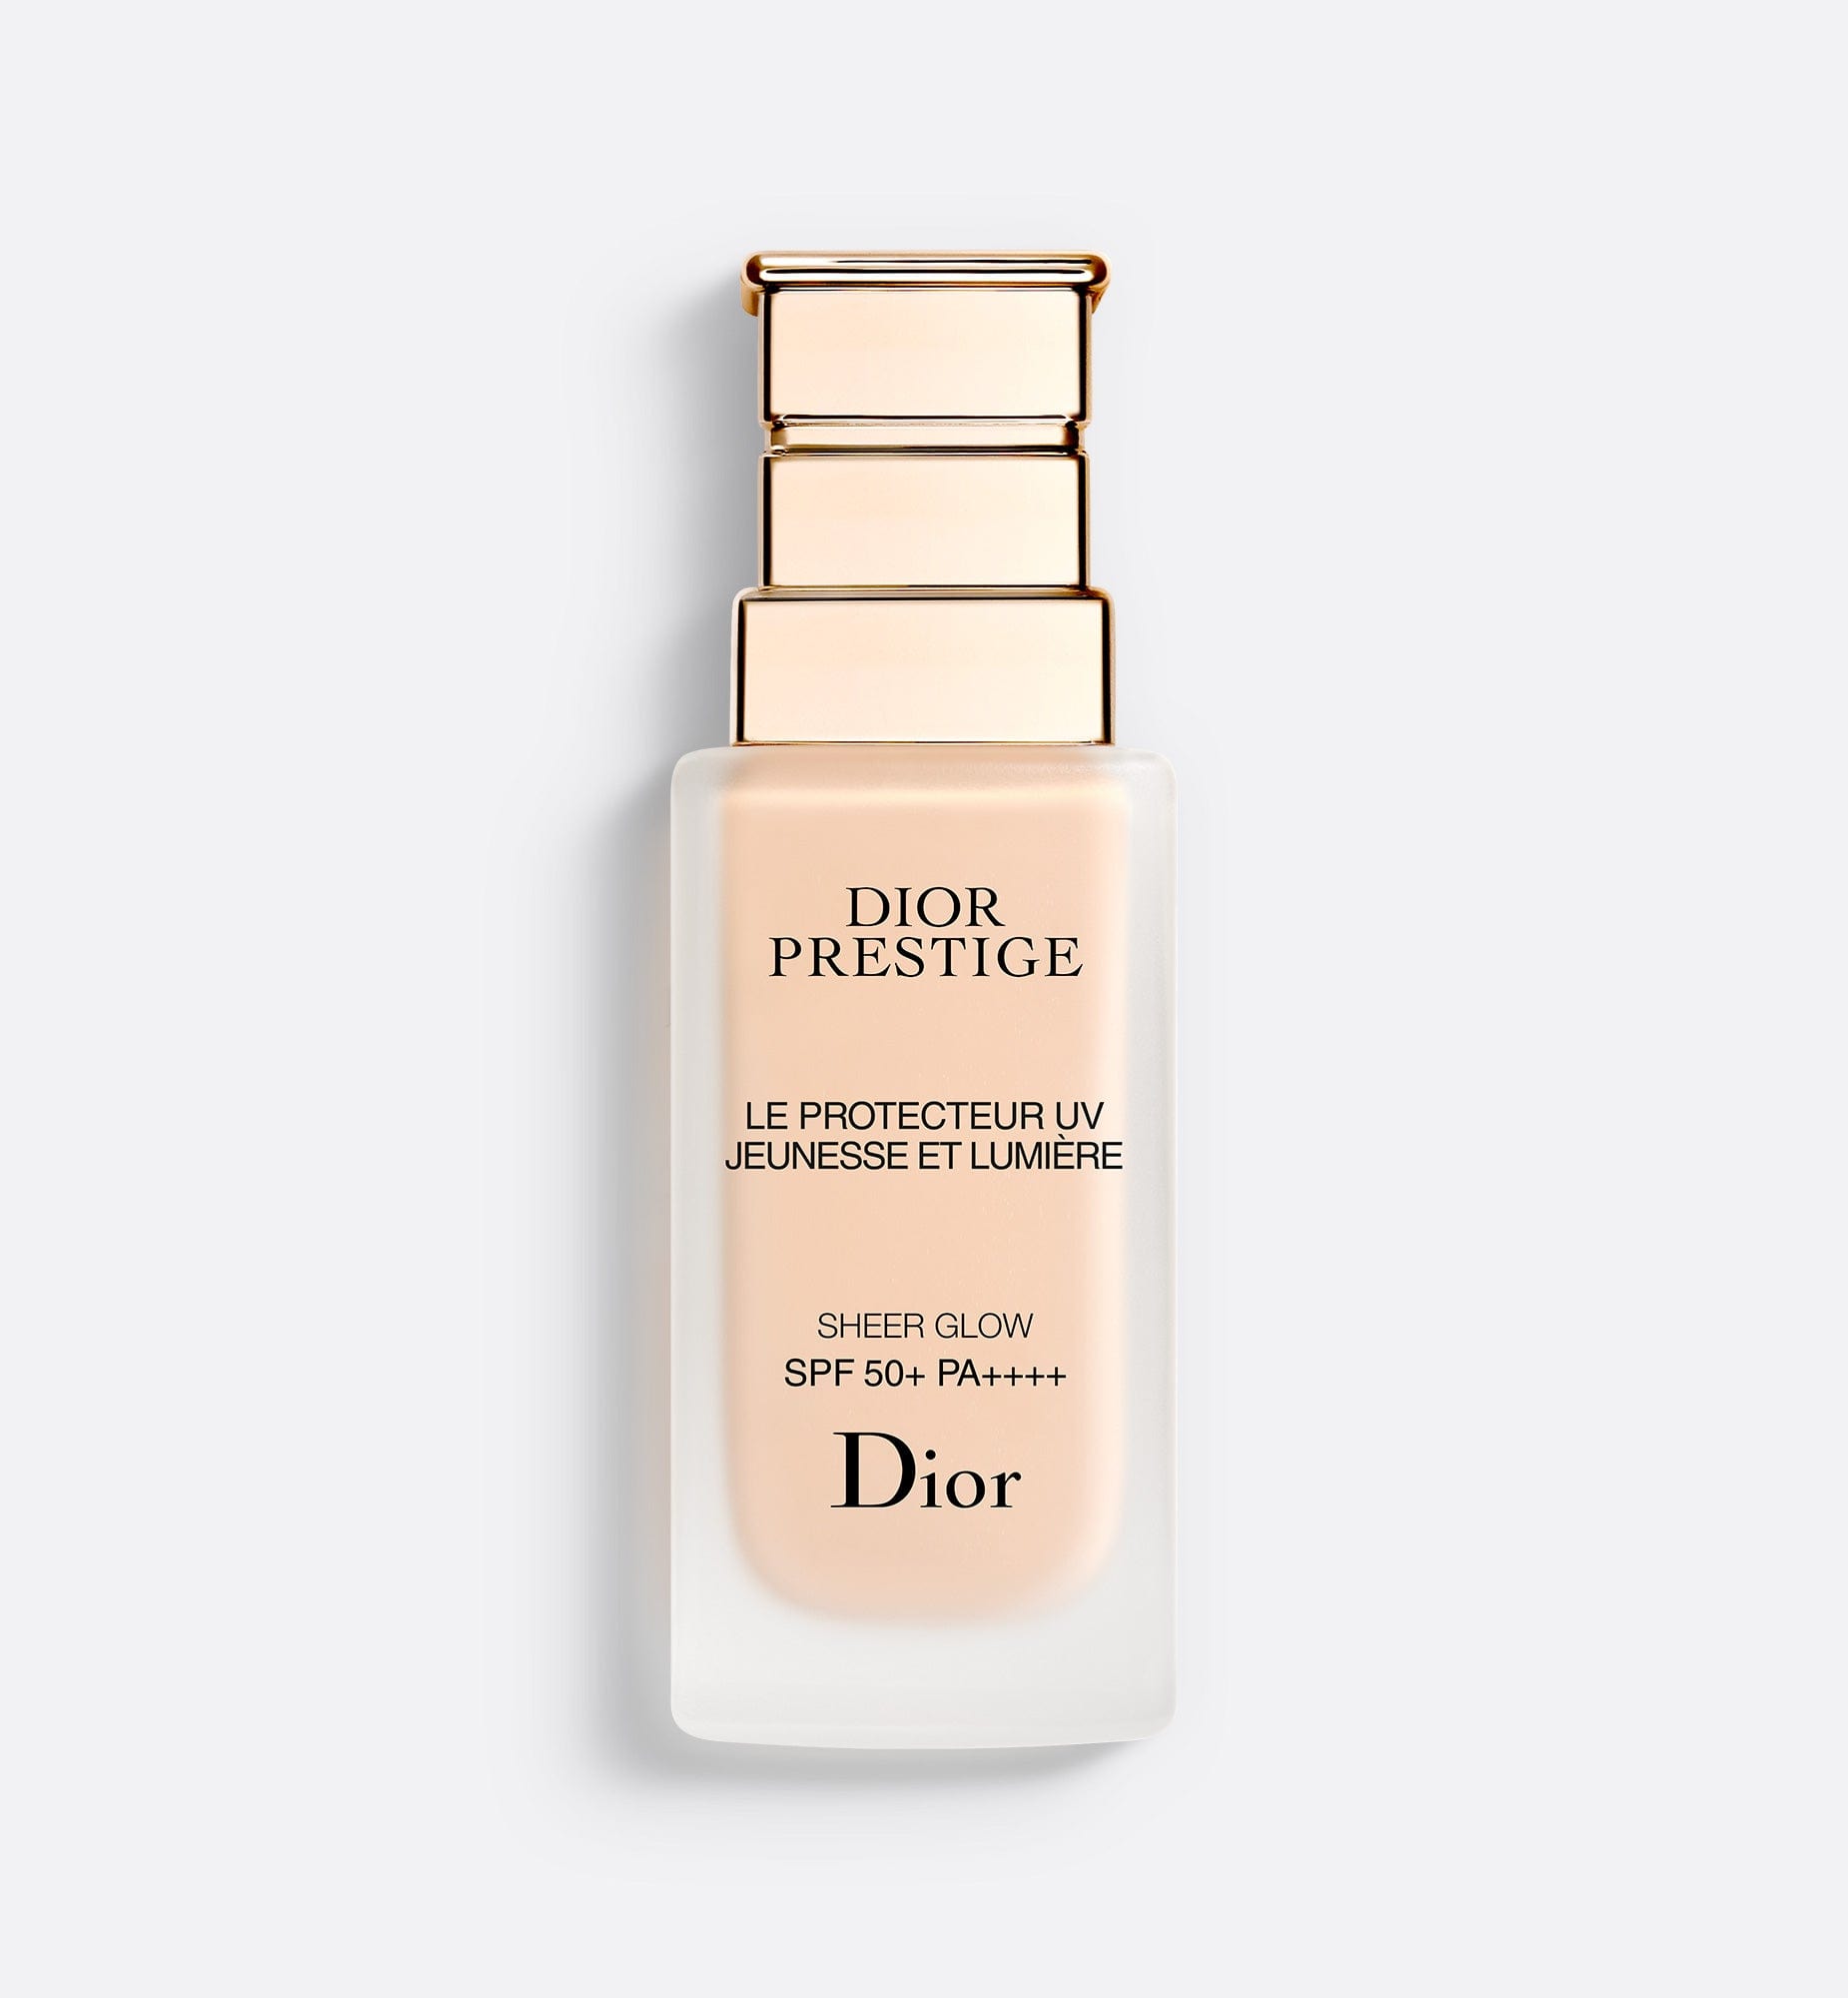 Dior Prestige Light-in-White Le Protecteur UV Sheer Glow SPF50+ PA++++ | Exceptional Skin-Protecting and Correcting Fluid - Face and Neck